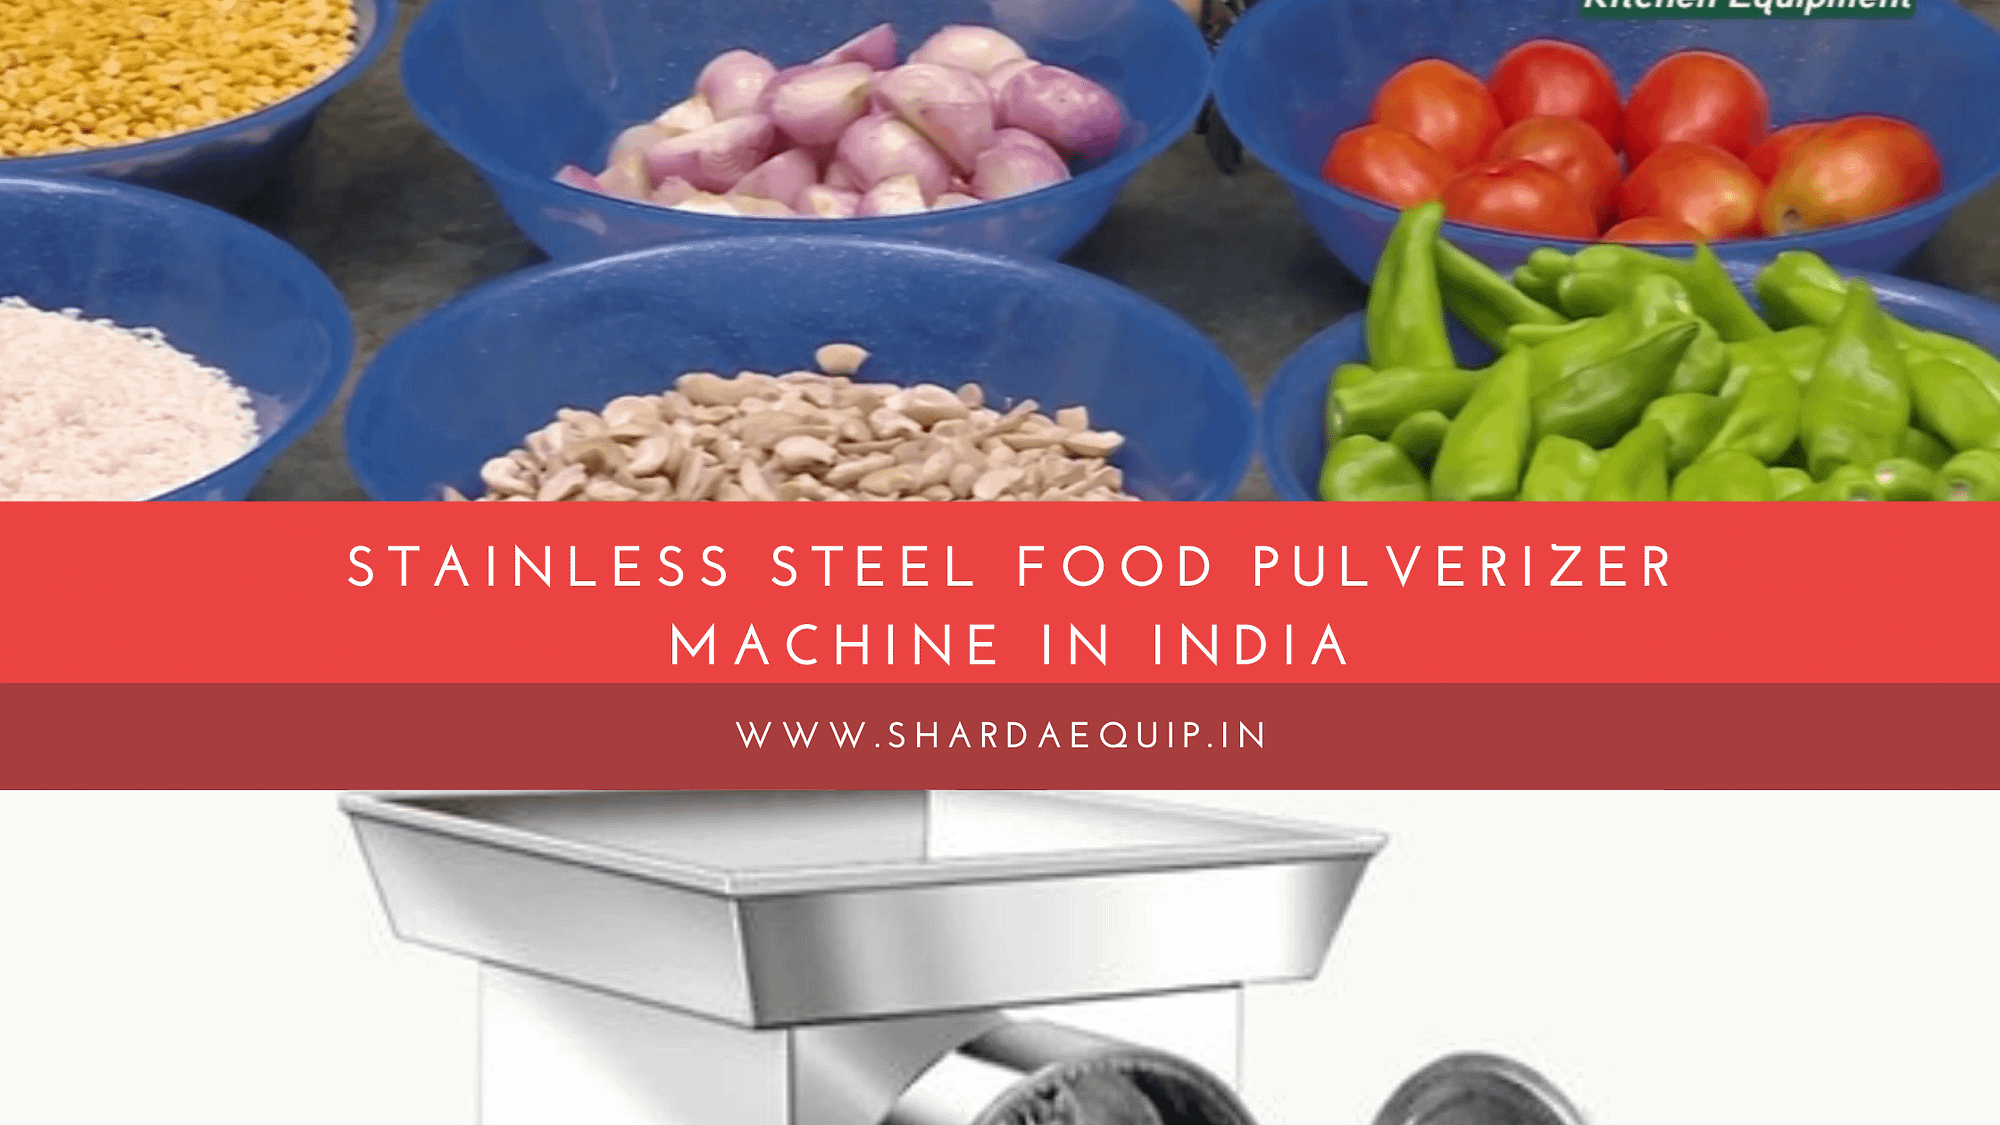 Stainless Steel Food Pulverizer Machine In India